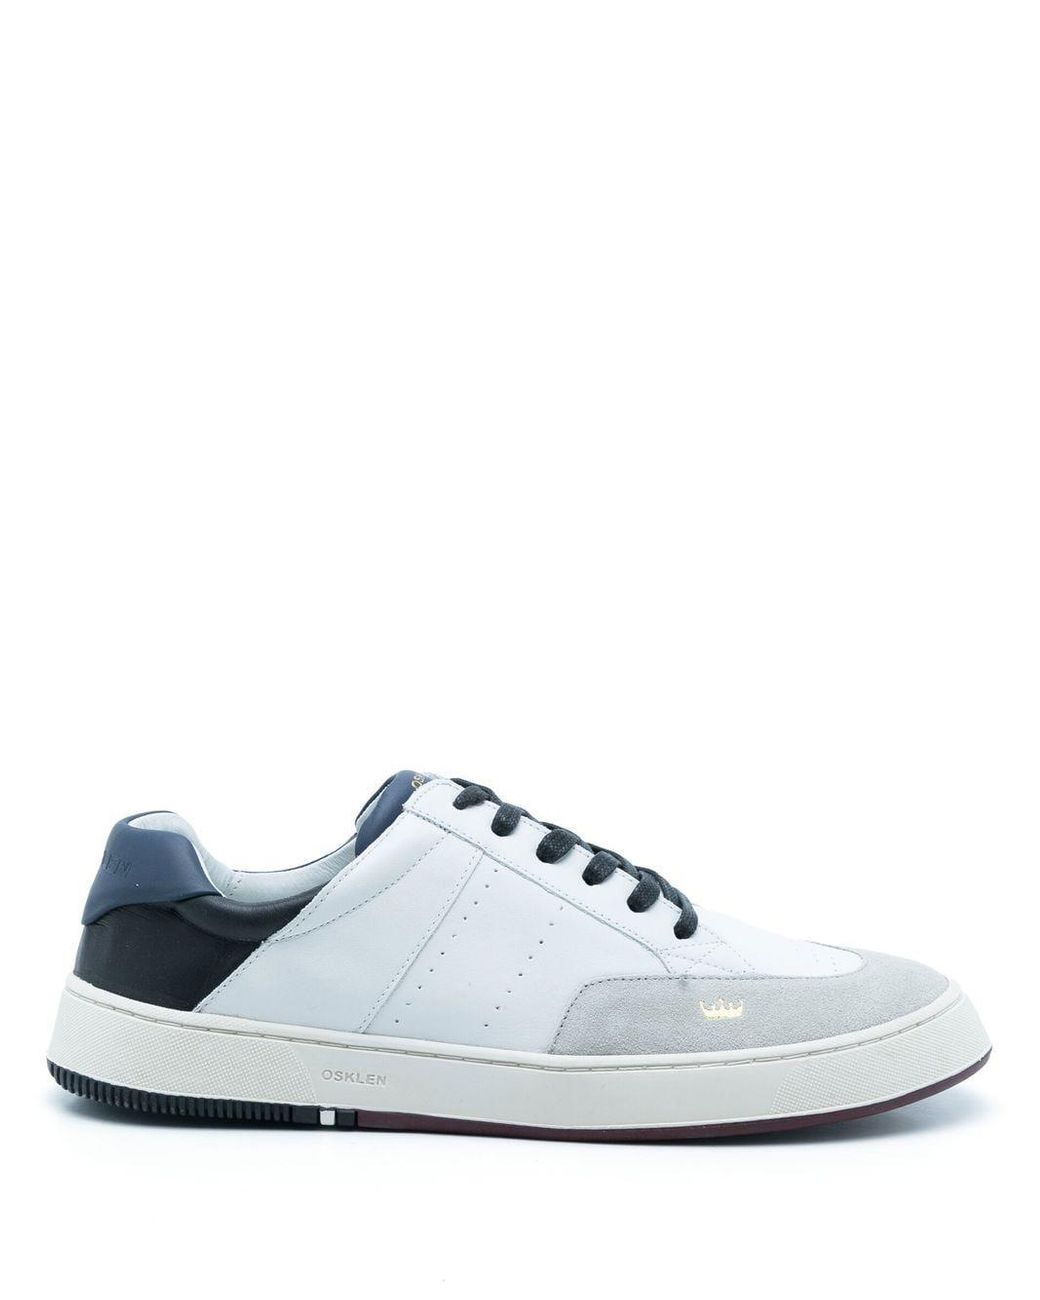 Osklen Low-top Lace-up Sneakers in White for Men | Lyst